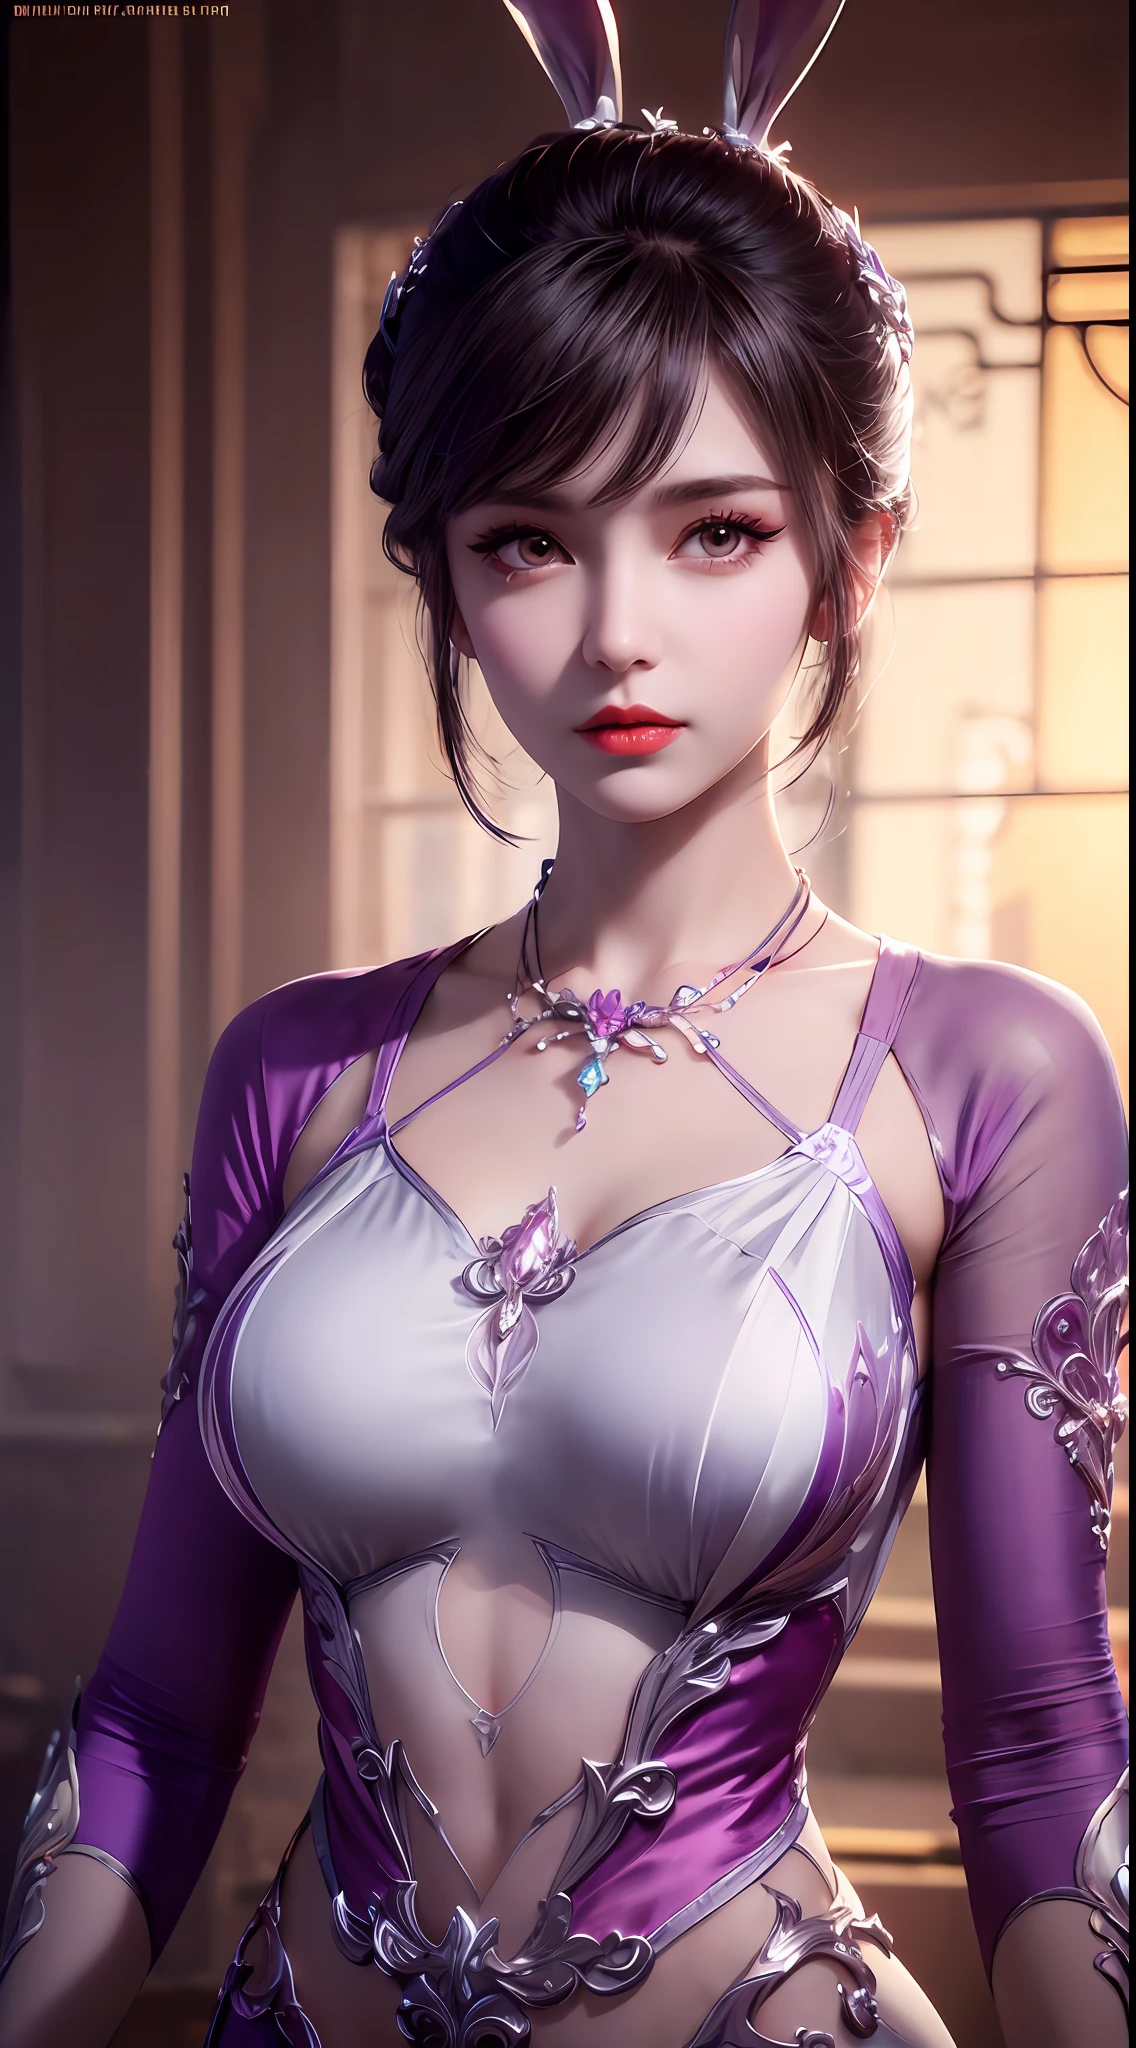 1 beautiful girl in Han costume, thin purple silk shirt with white color with many textures, white lace top, long platinum purple ponytail, hair jewelry, ear jewelry, light purple rabbit ears, necklace and necklace, meticulously drawn large purple eyes, meticulous makeup, thin eyebrows, high nose, lovely red lips, not smiling, pursed lips, rosy cheeks, wide breasts, big breasts , well-proportioned bust, slim waist, purple mesh socks, chinese hanfu style, fictitious art textures, vivid and realistic colors, RAW photos, realistic photos, ultra high quality 8k surreal photos, (effective fantasy light effect: 1.8), 10x pixel, magic effect (background): 1.8), super detailed eyes, girl body portrait, ancient hanfu background,